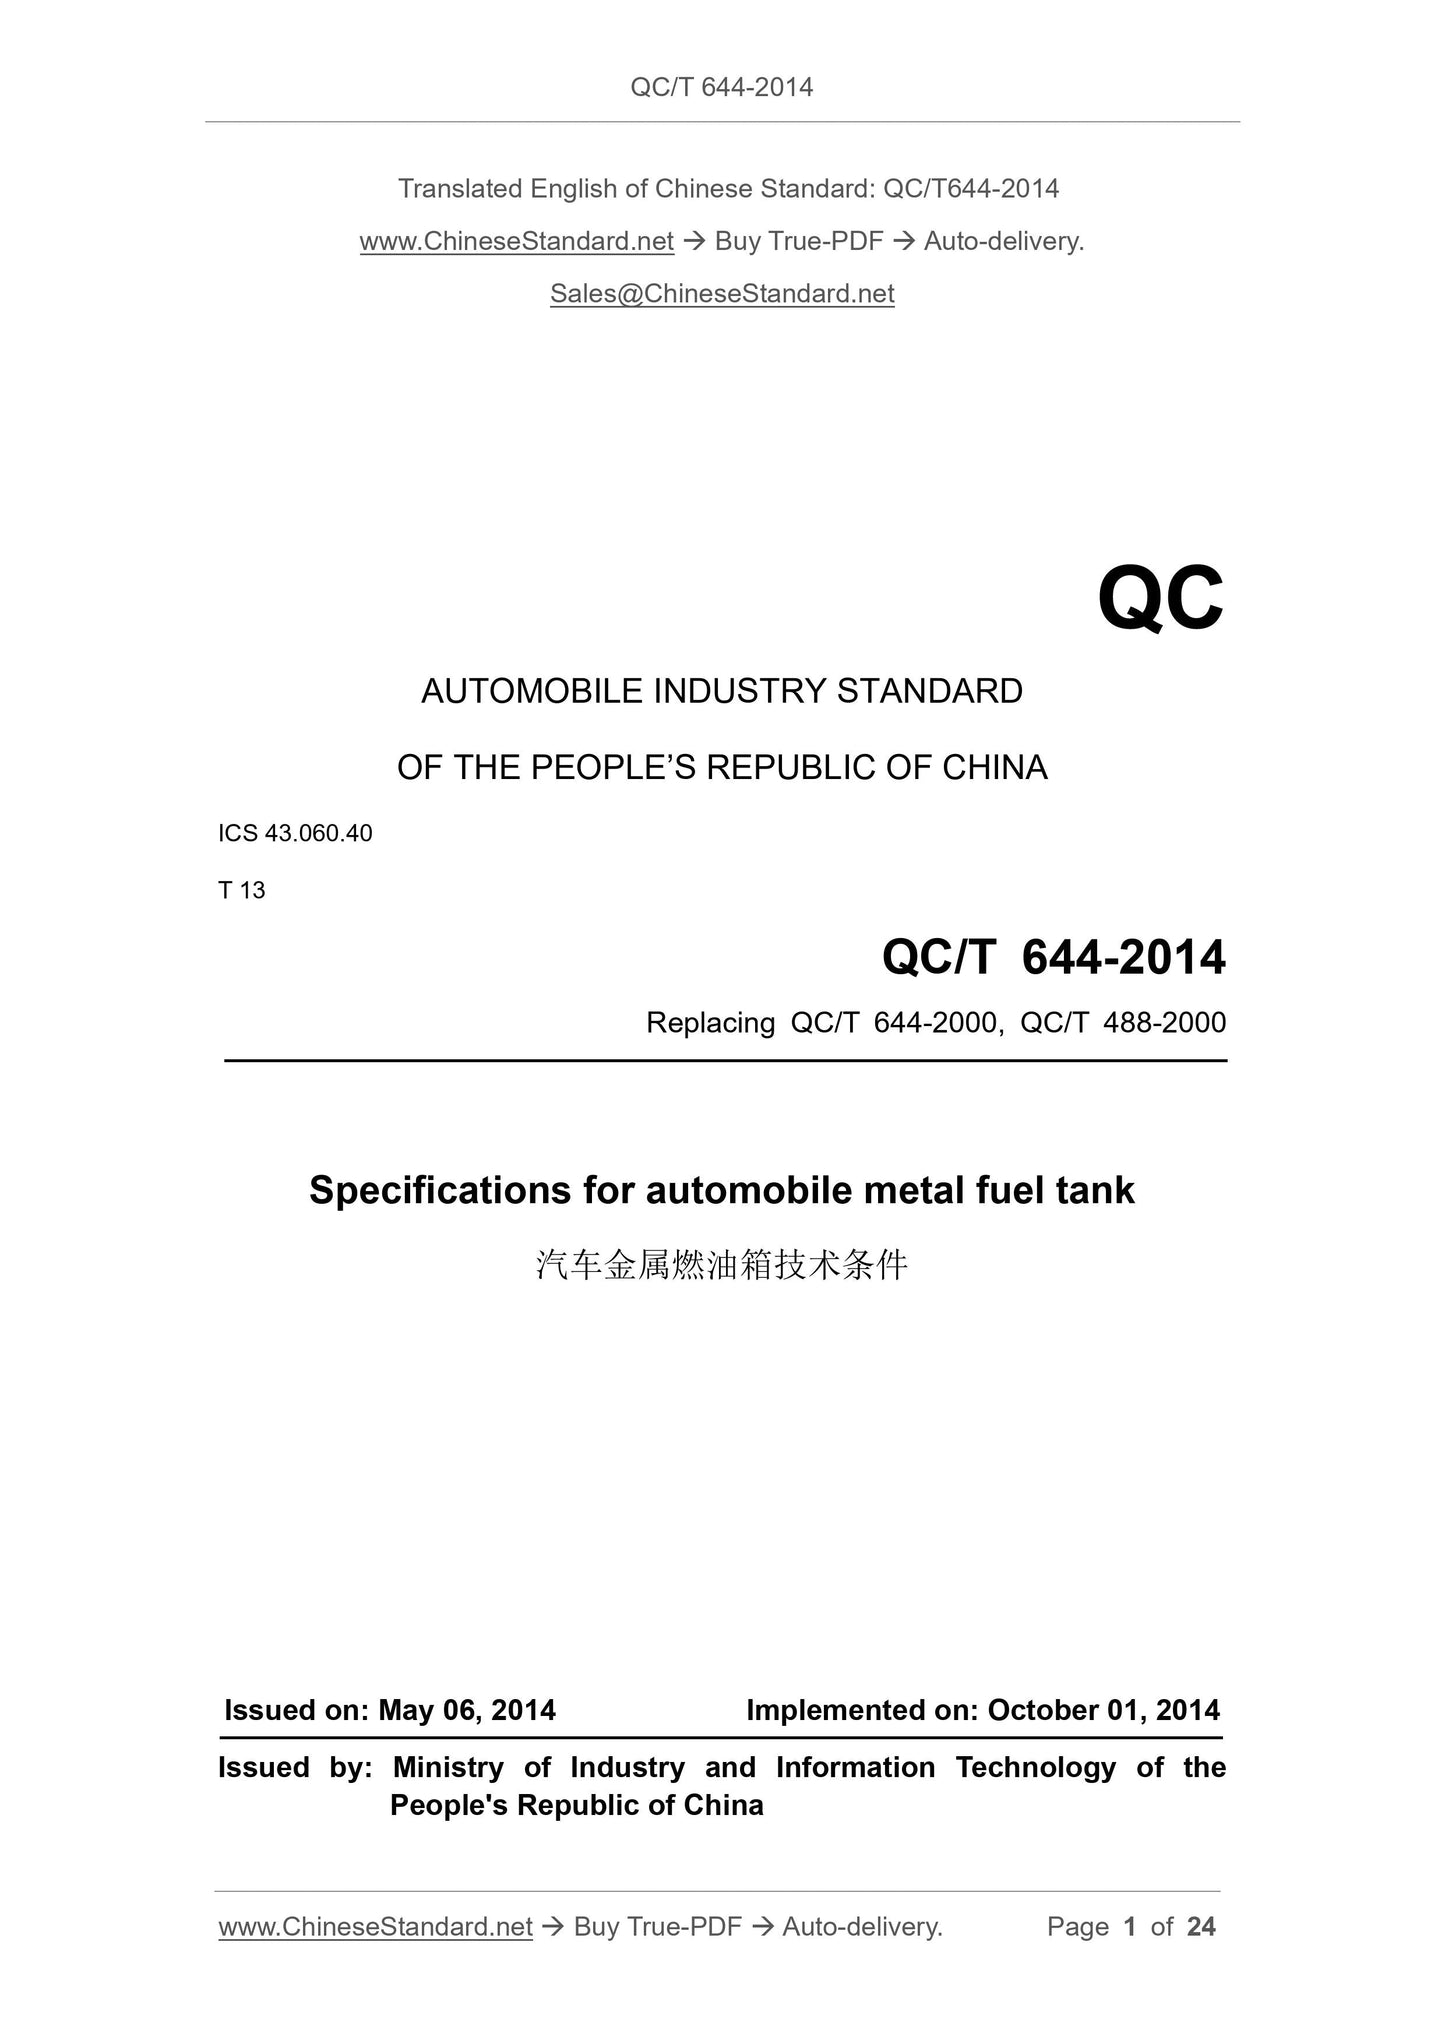 QC/T 644-2014 Page 1